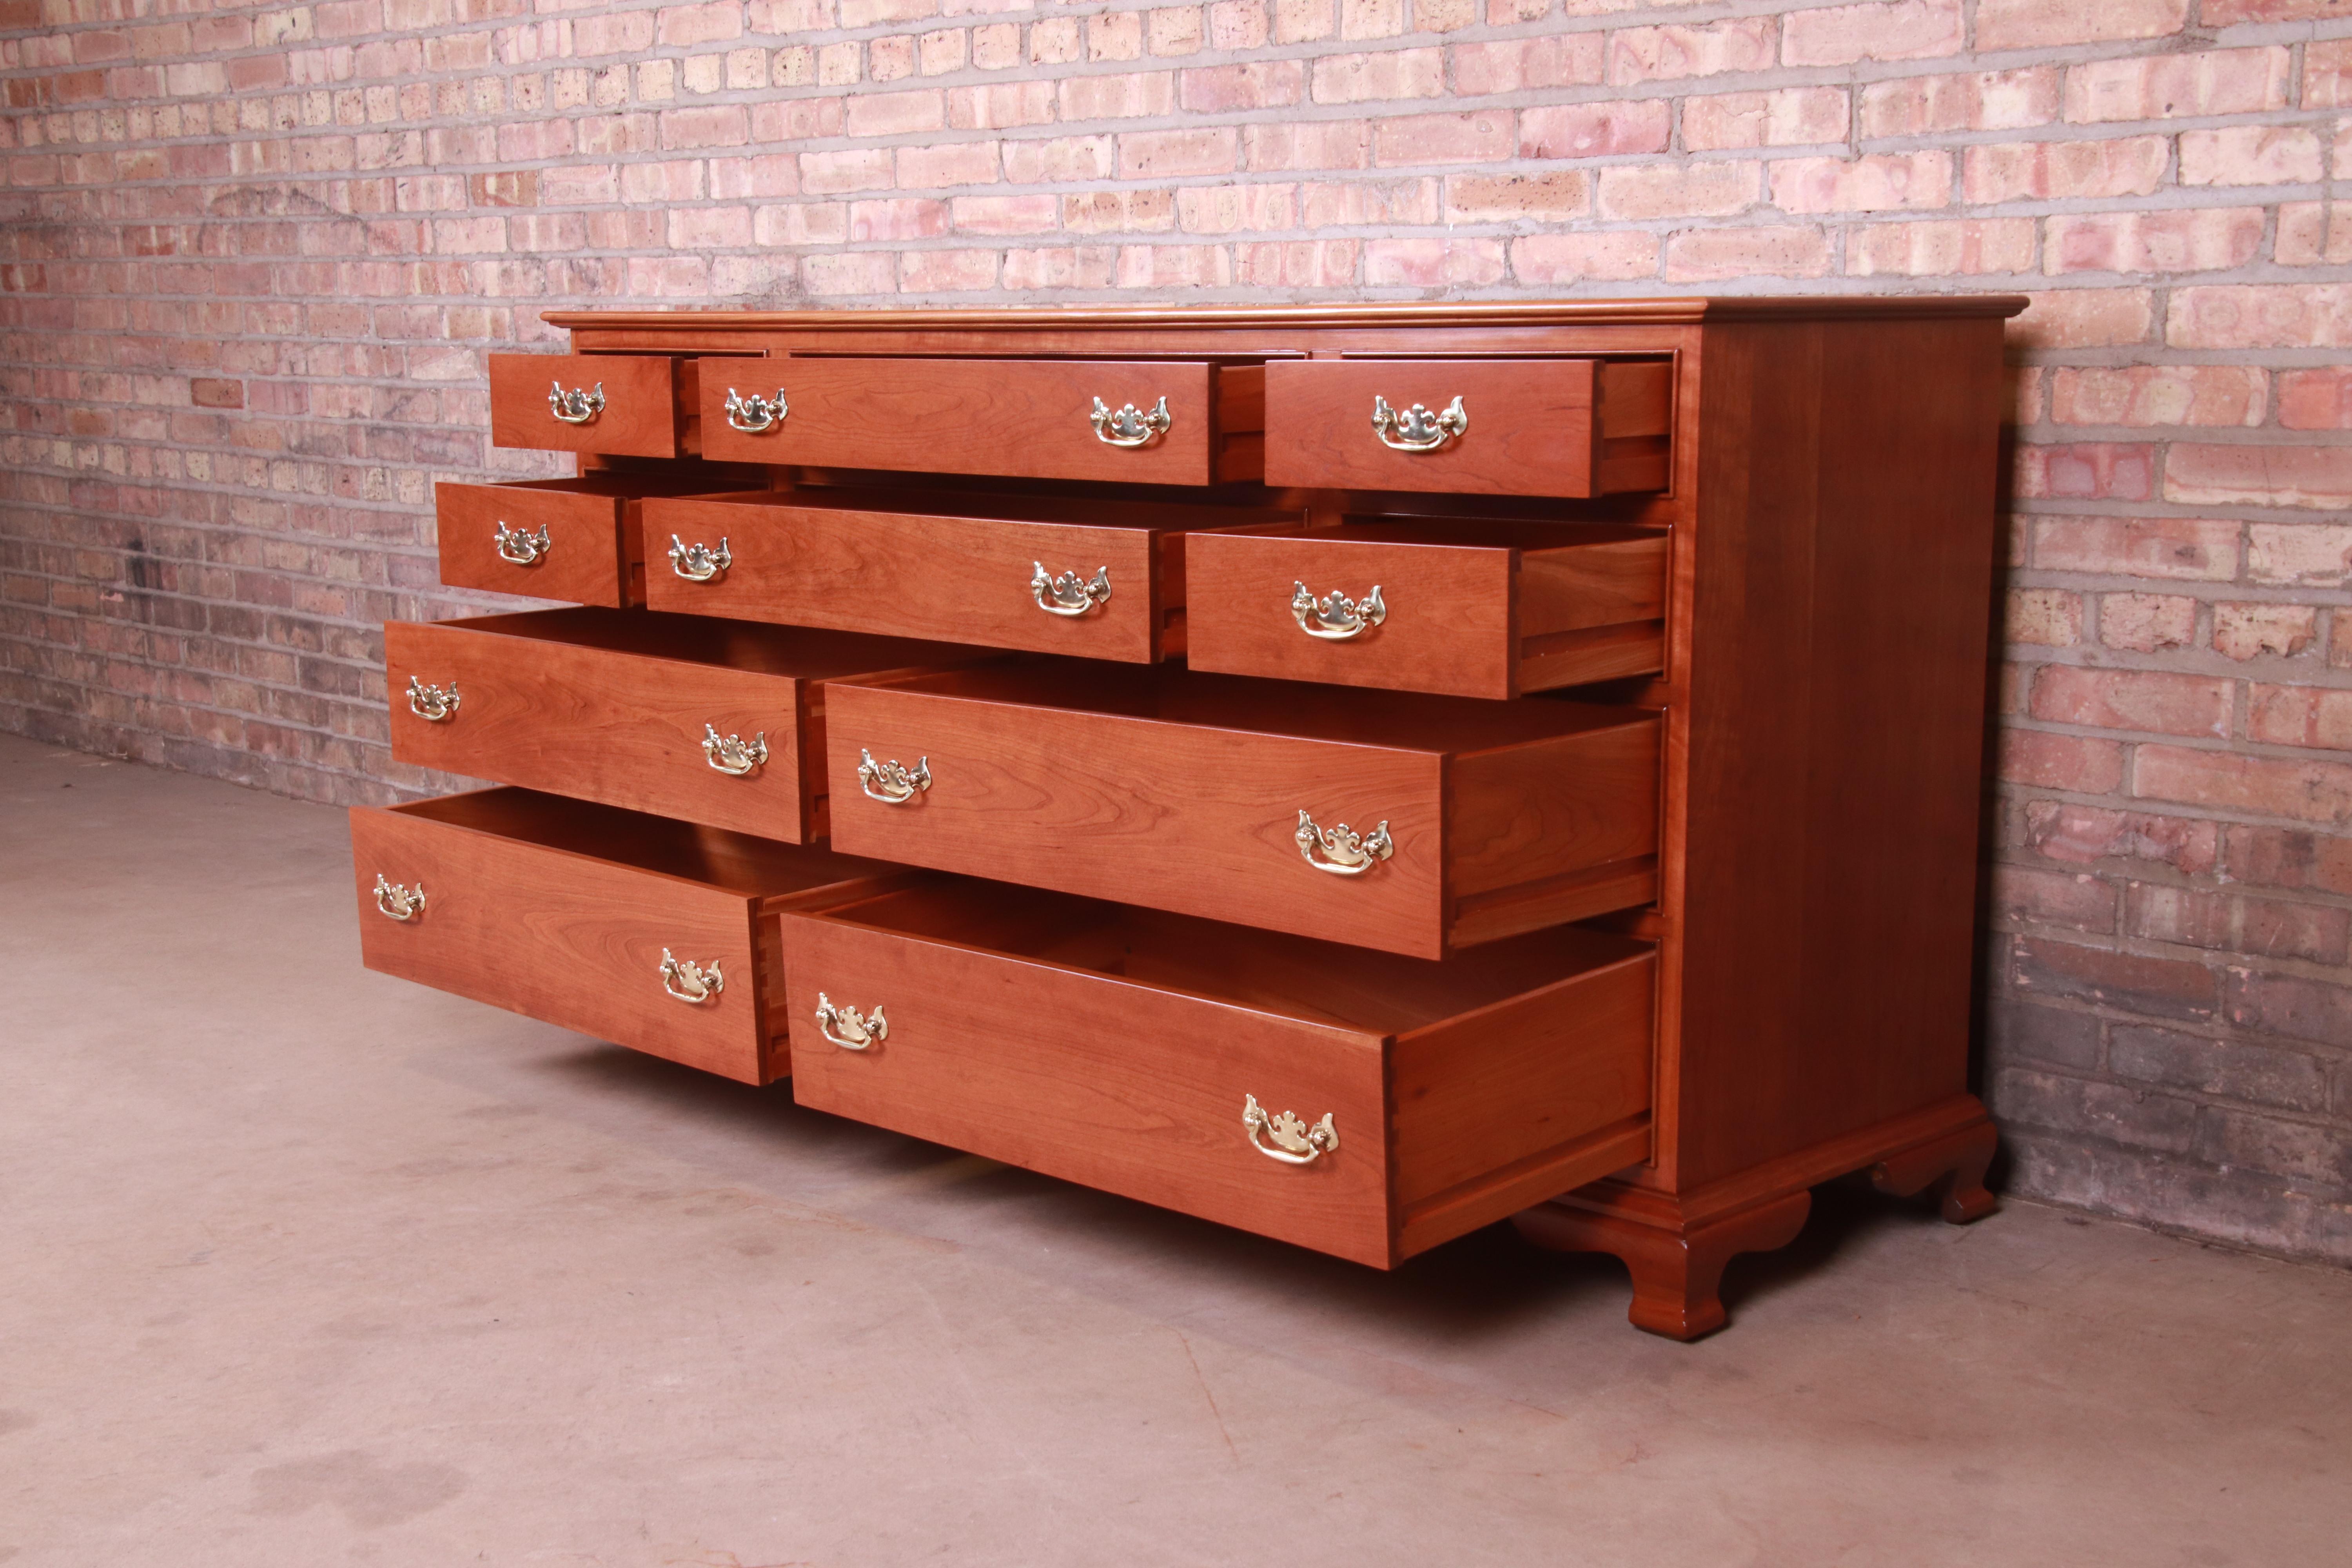 Stickley American Colonial Solid Cherry Wood Ten-Drawer Dresser, Refinished 1